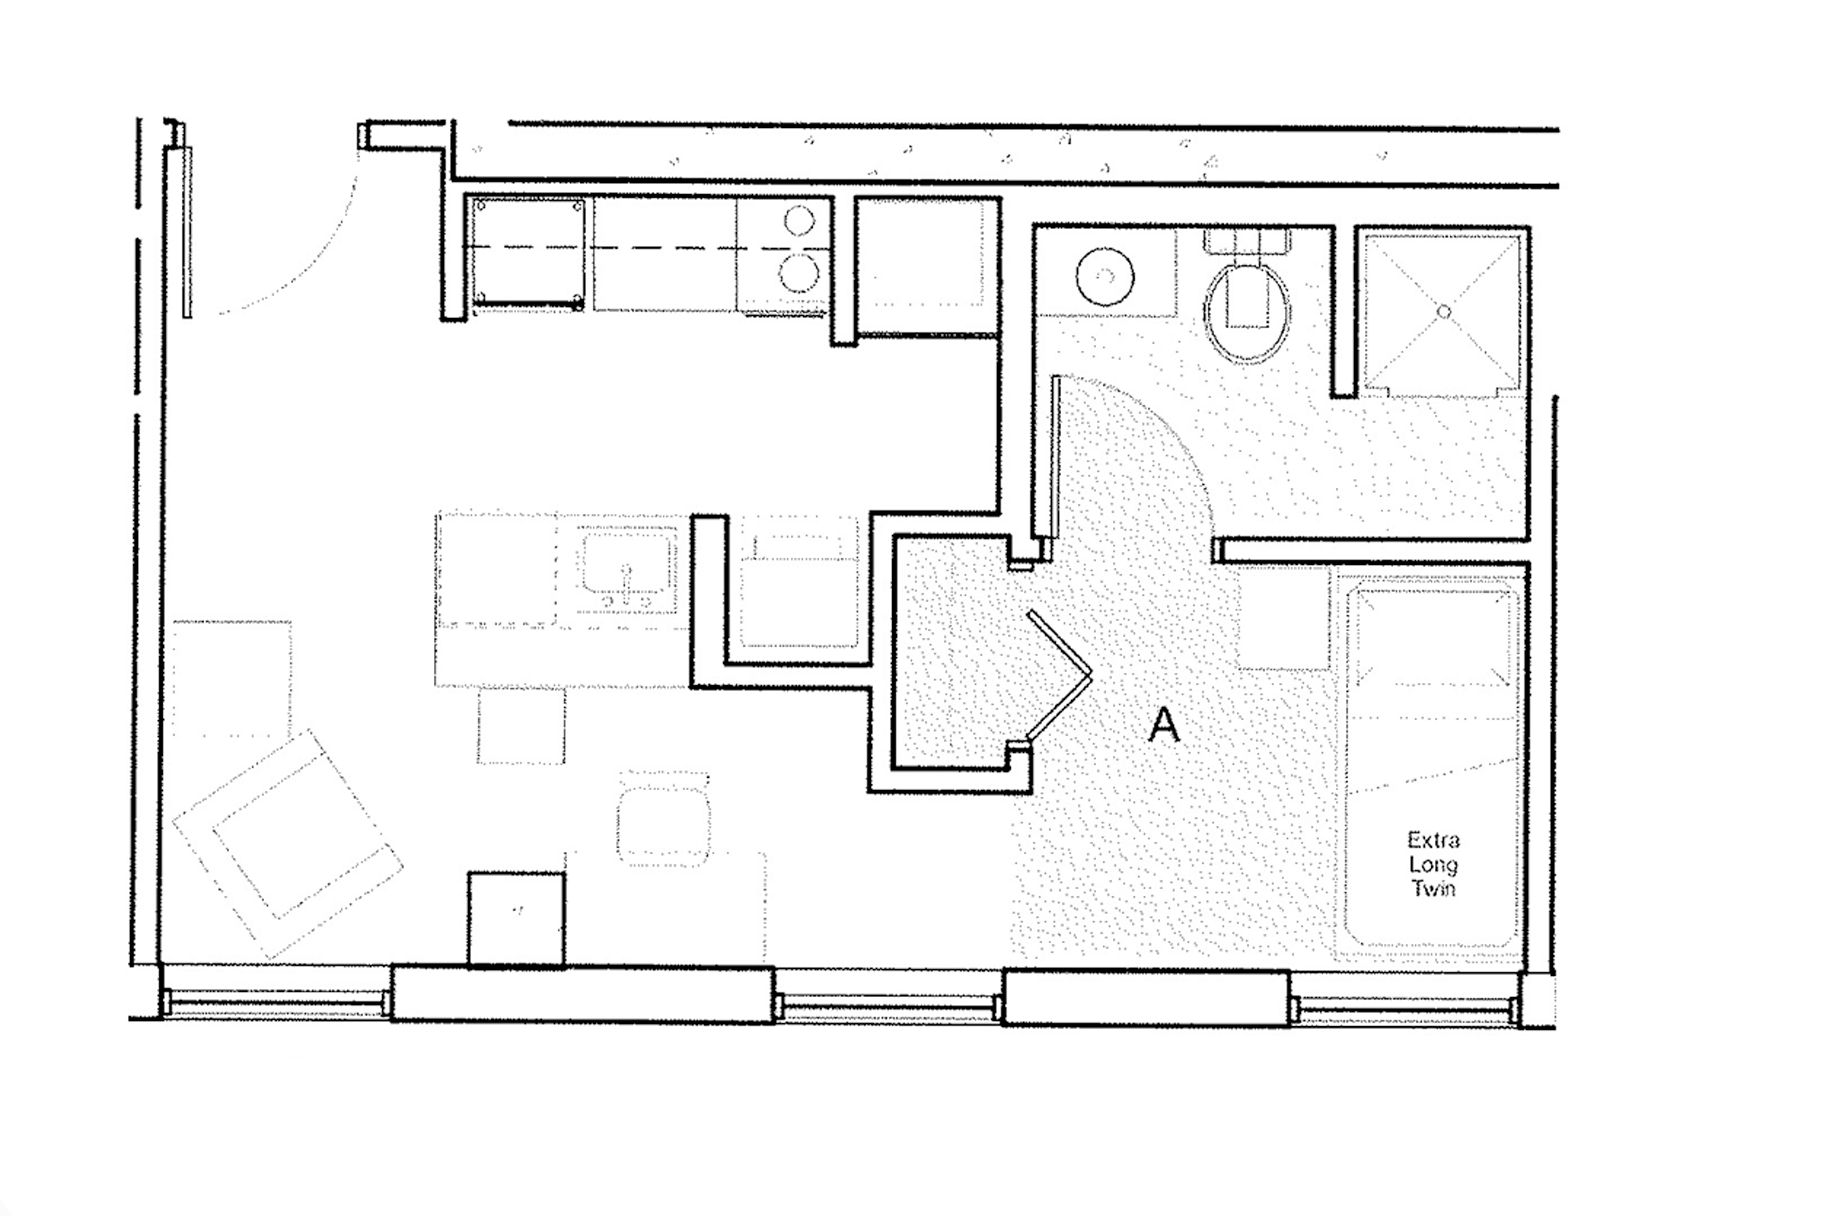 Studio Apartment Layout for 318